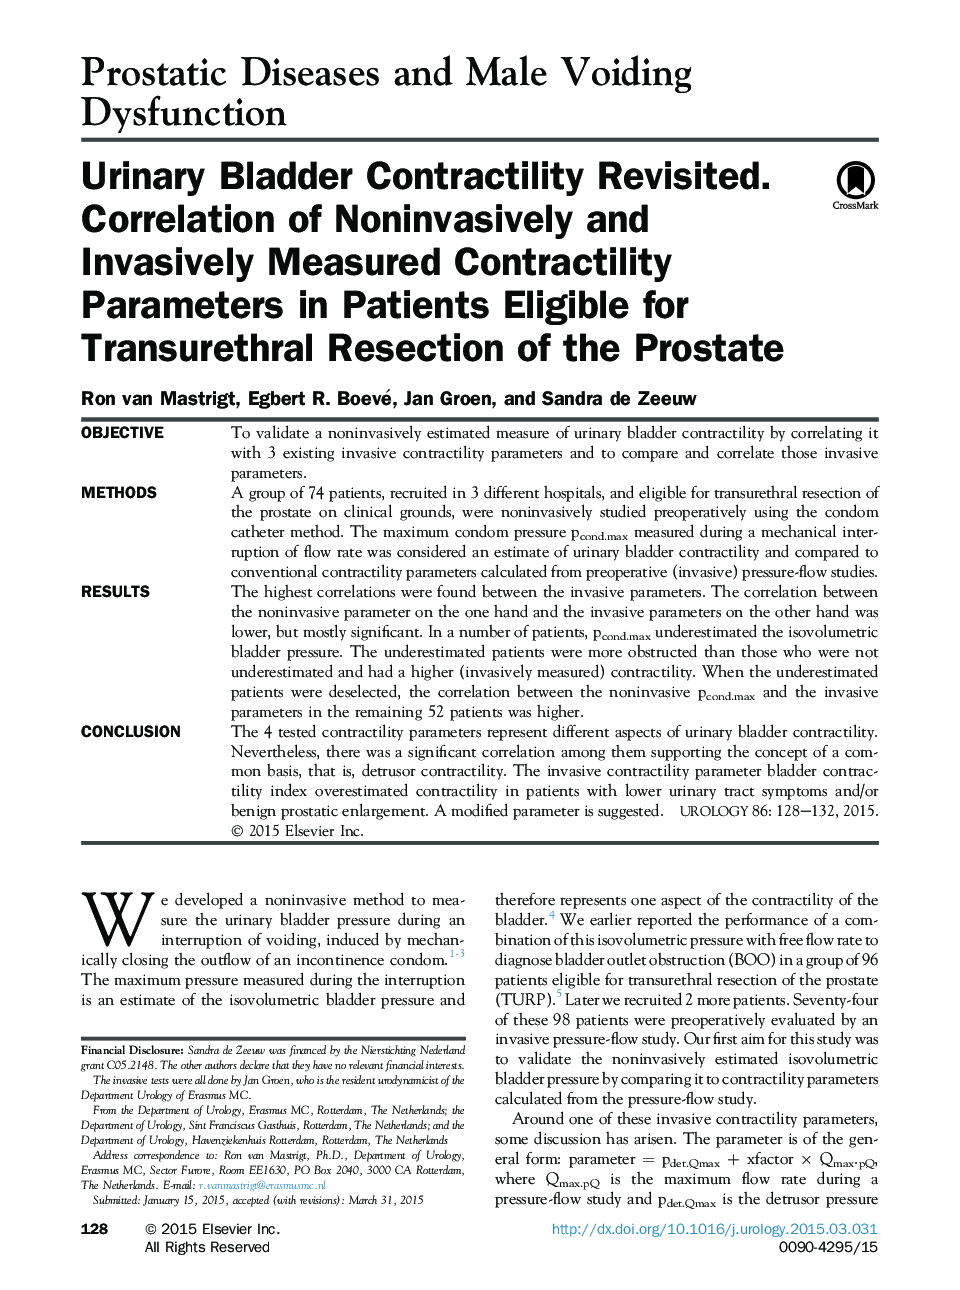 Urinary Bladder Contractility Revisited. Correlation of Noninvasively and Invasively Measured Contractility Parameters in Patients Eligible for Transurethral Resection of the Prostate 